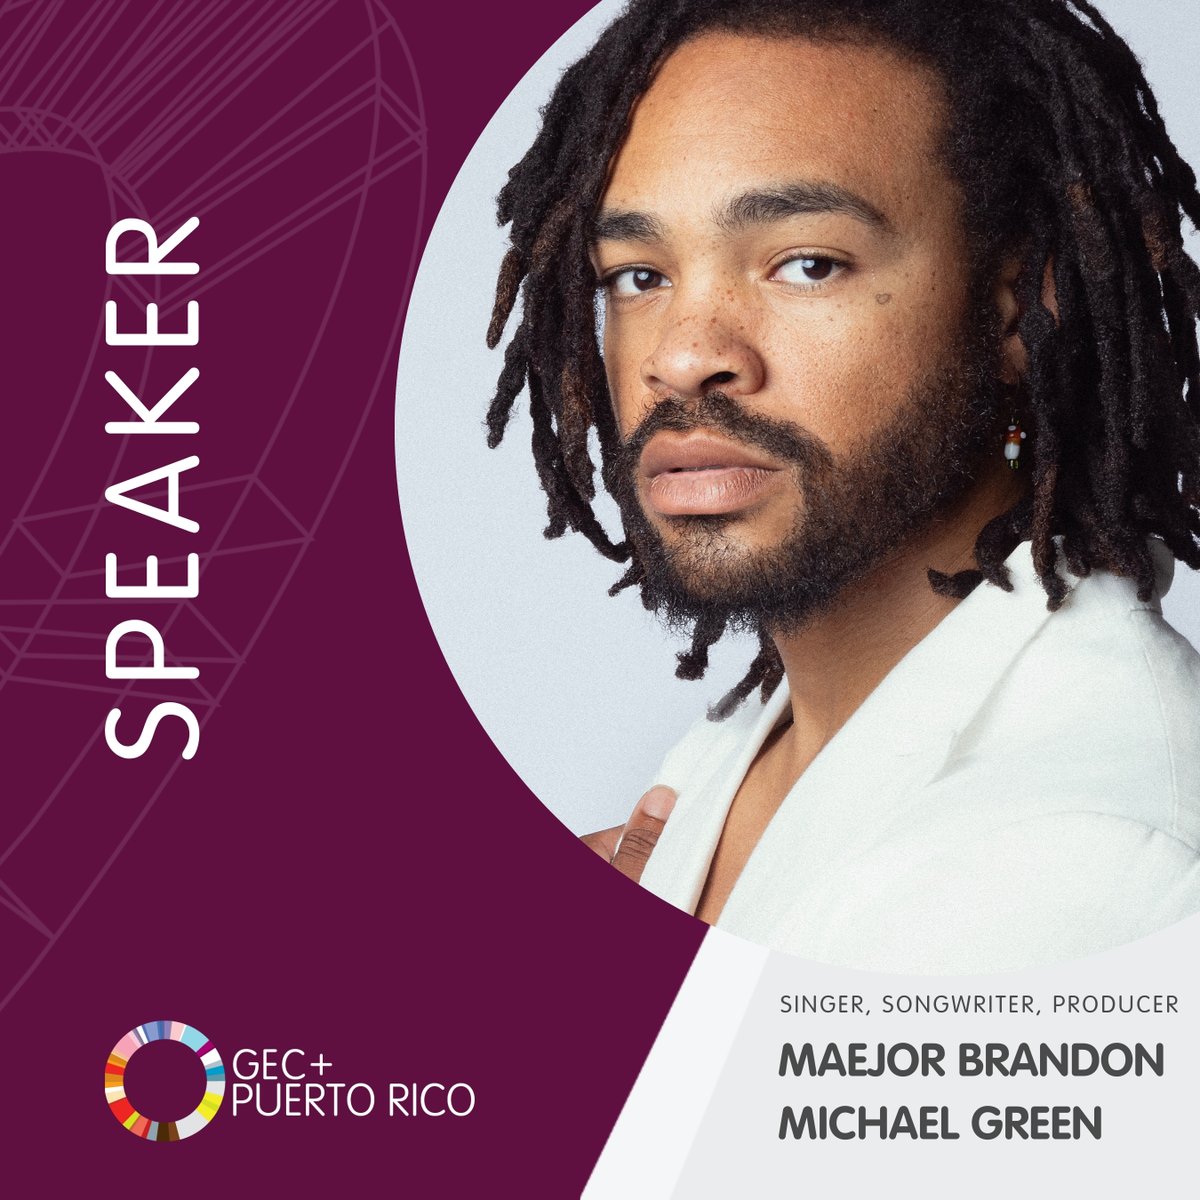 Maejor, a multi-platinum producer/singer/songwriter who has worked w/ the likes of Bieber, Drake + Ciara - will be onstage at GEC+Puerto Rico July 15-18. Join us: genglobal.org/gec-plus/puert… #GECPlusPR #startup #entrepreneur #innovation #empredimiento #inversionistas #emprendedores